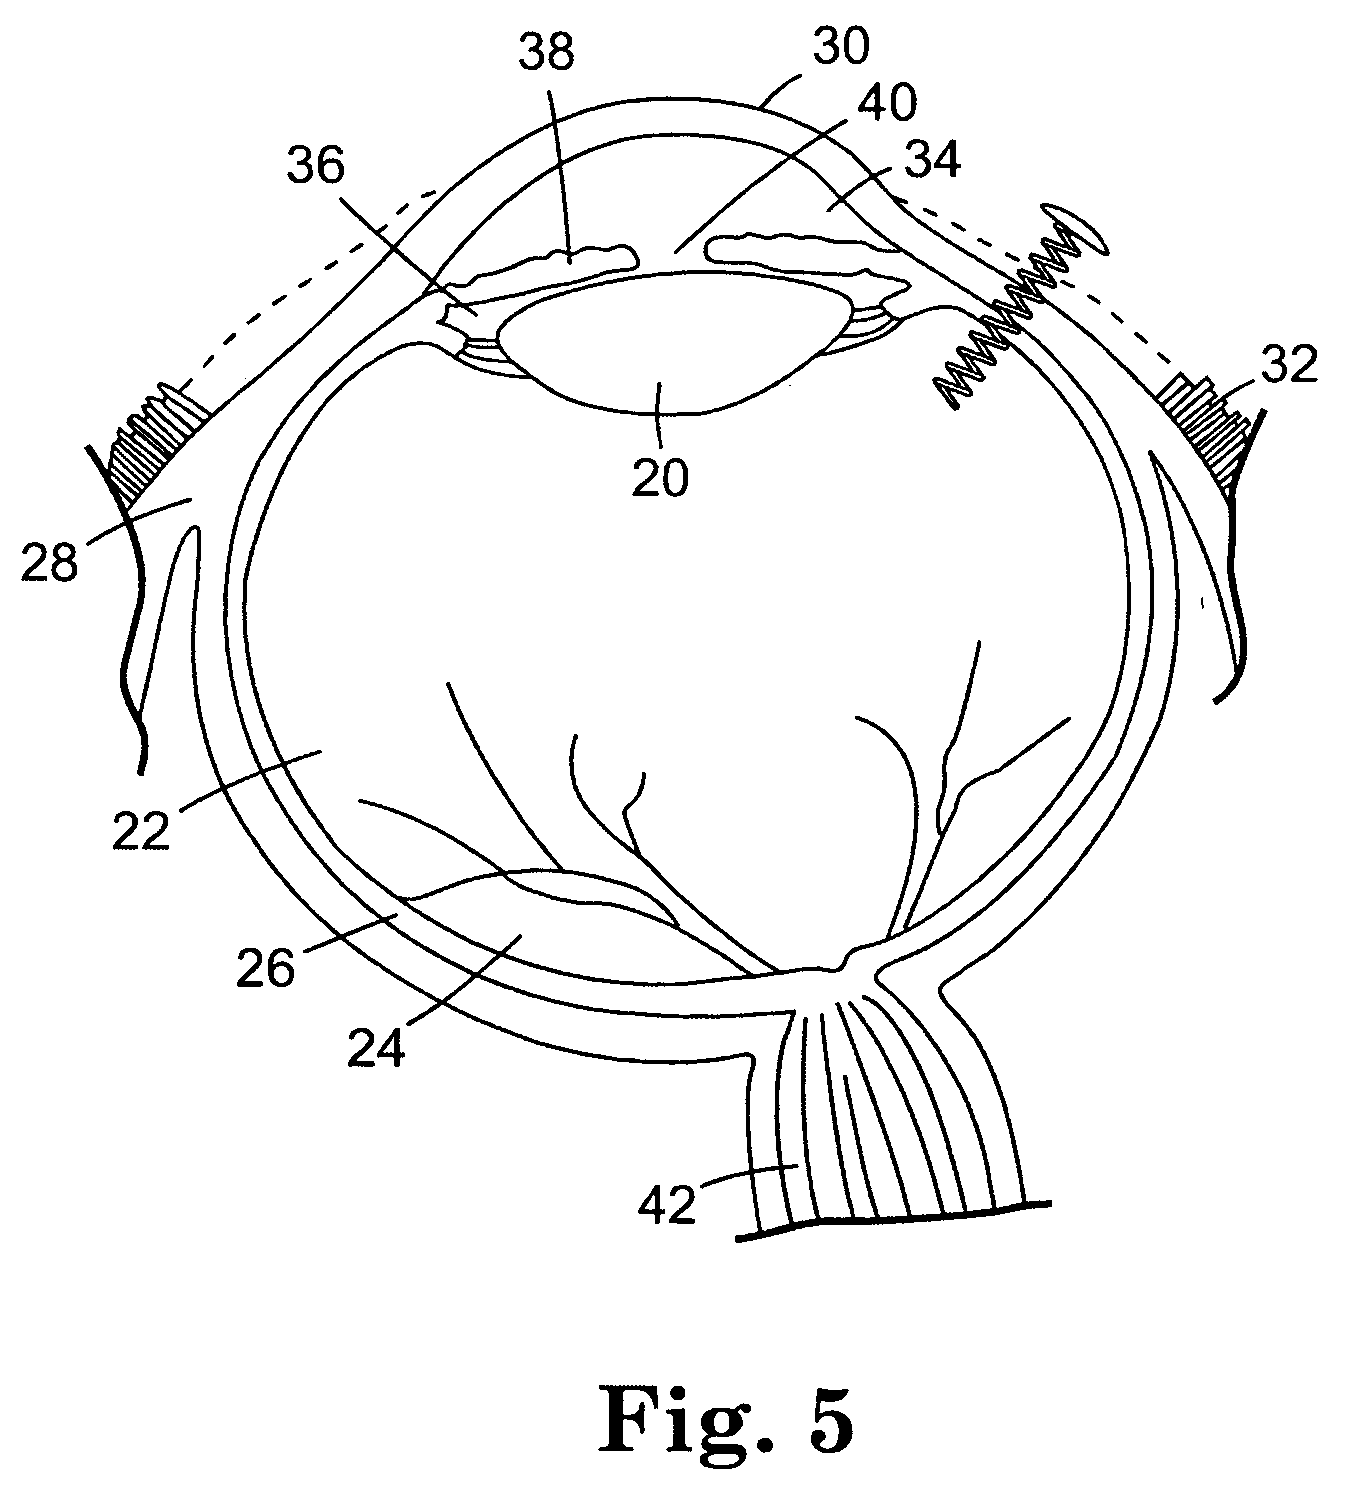 Biodegradable controlled release bioactive agent delivery device